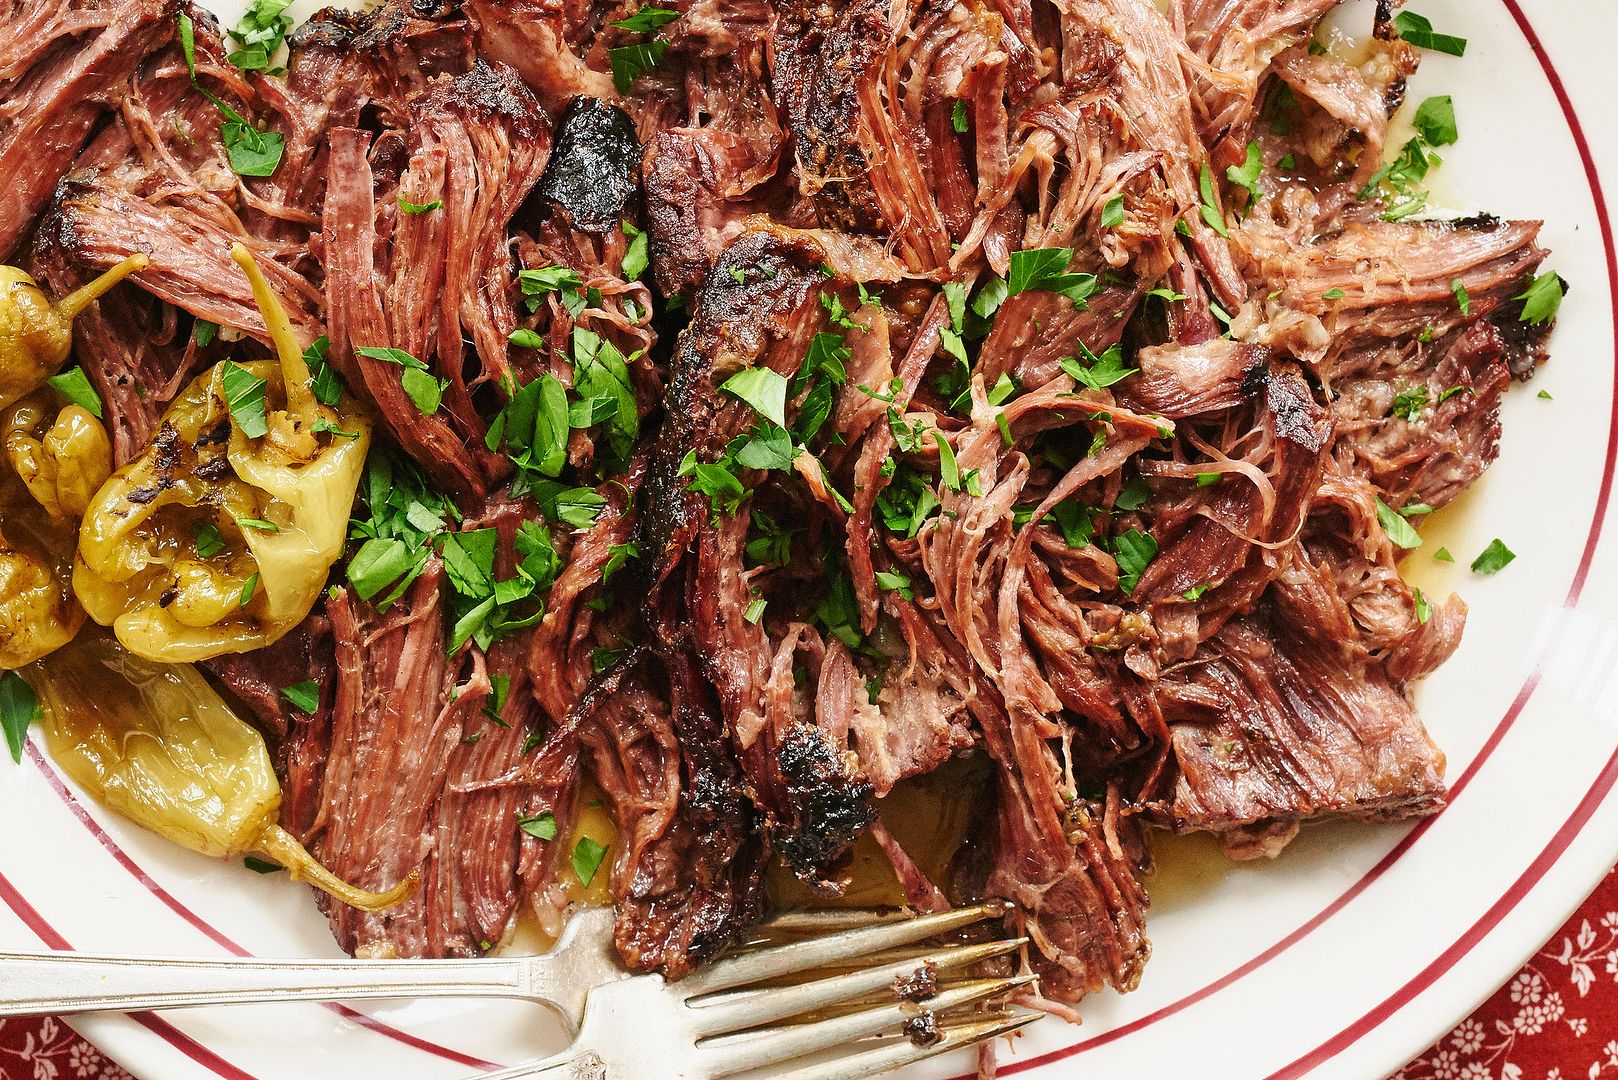 Cool Mom Eats weekly meal plan: One of our all time favorite slow cooker meals, Mississippi Roast by Sam Sifton at The New York Times